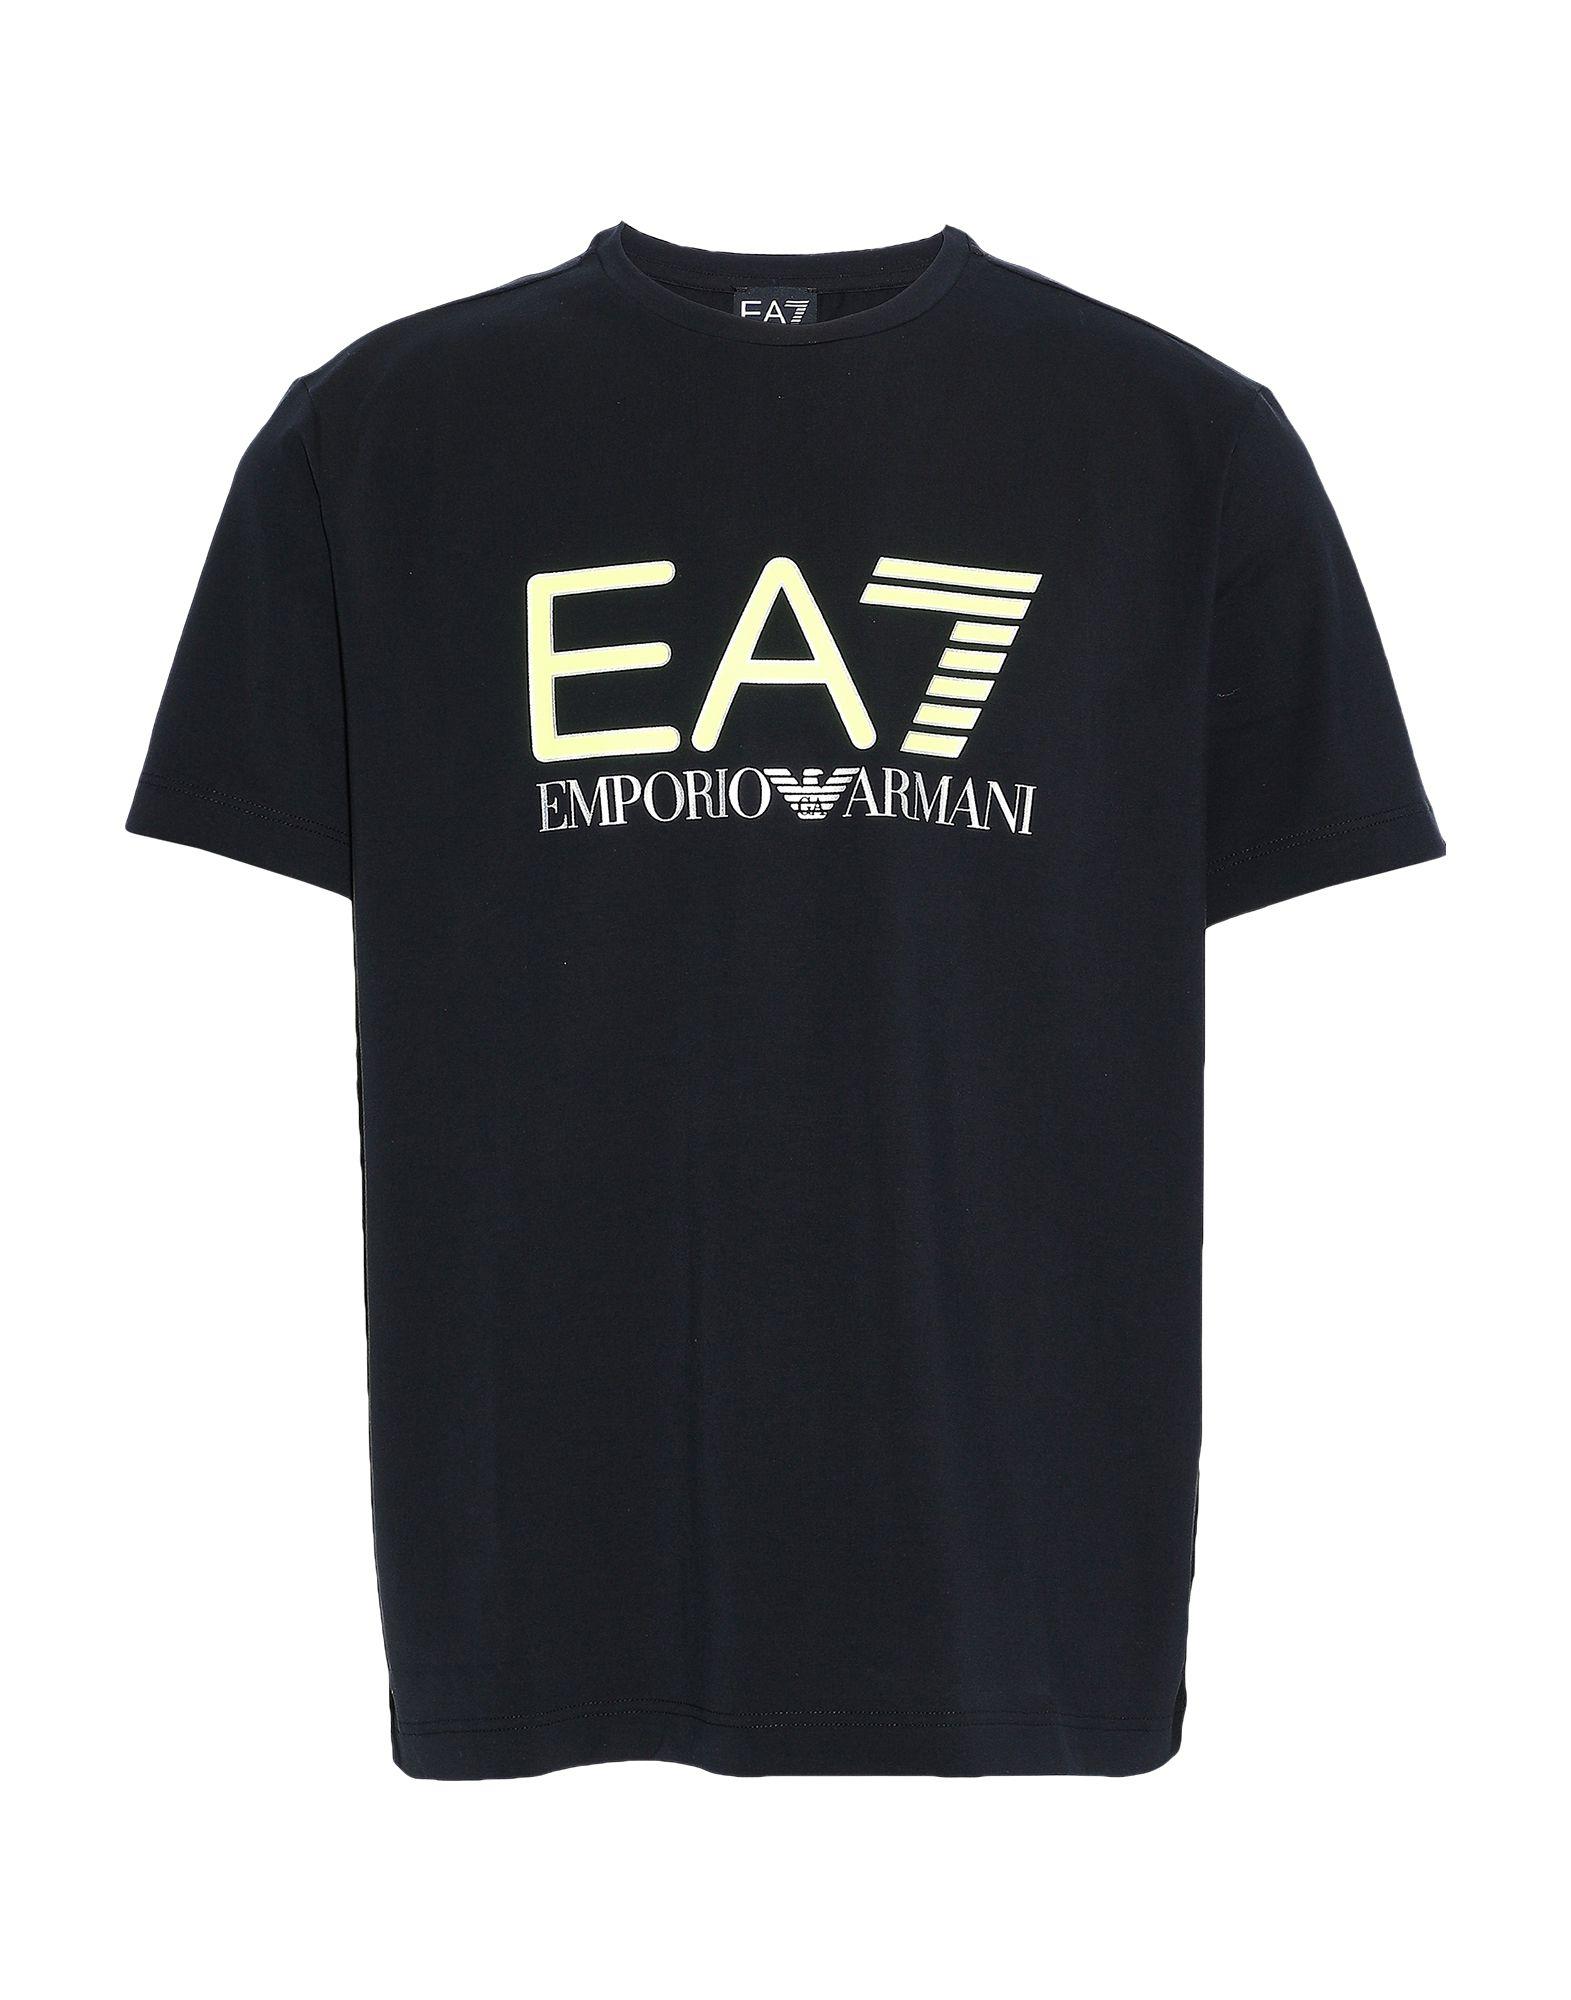 EA7 Synthetic T-shirt in Black for Men - Save 50% - Lyst